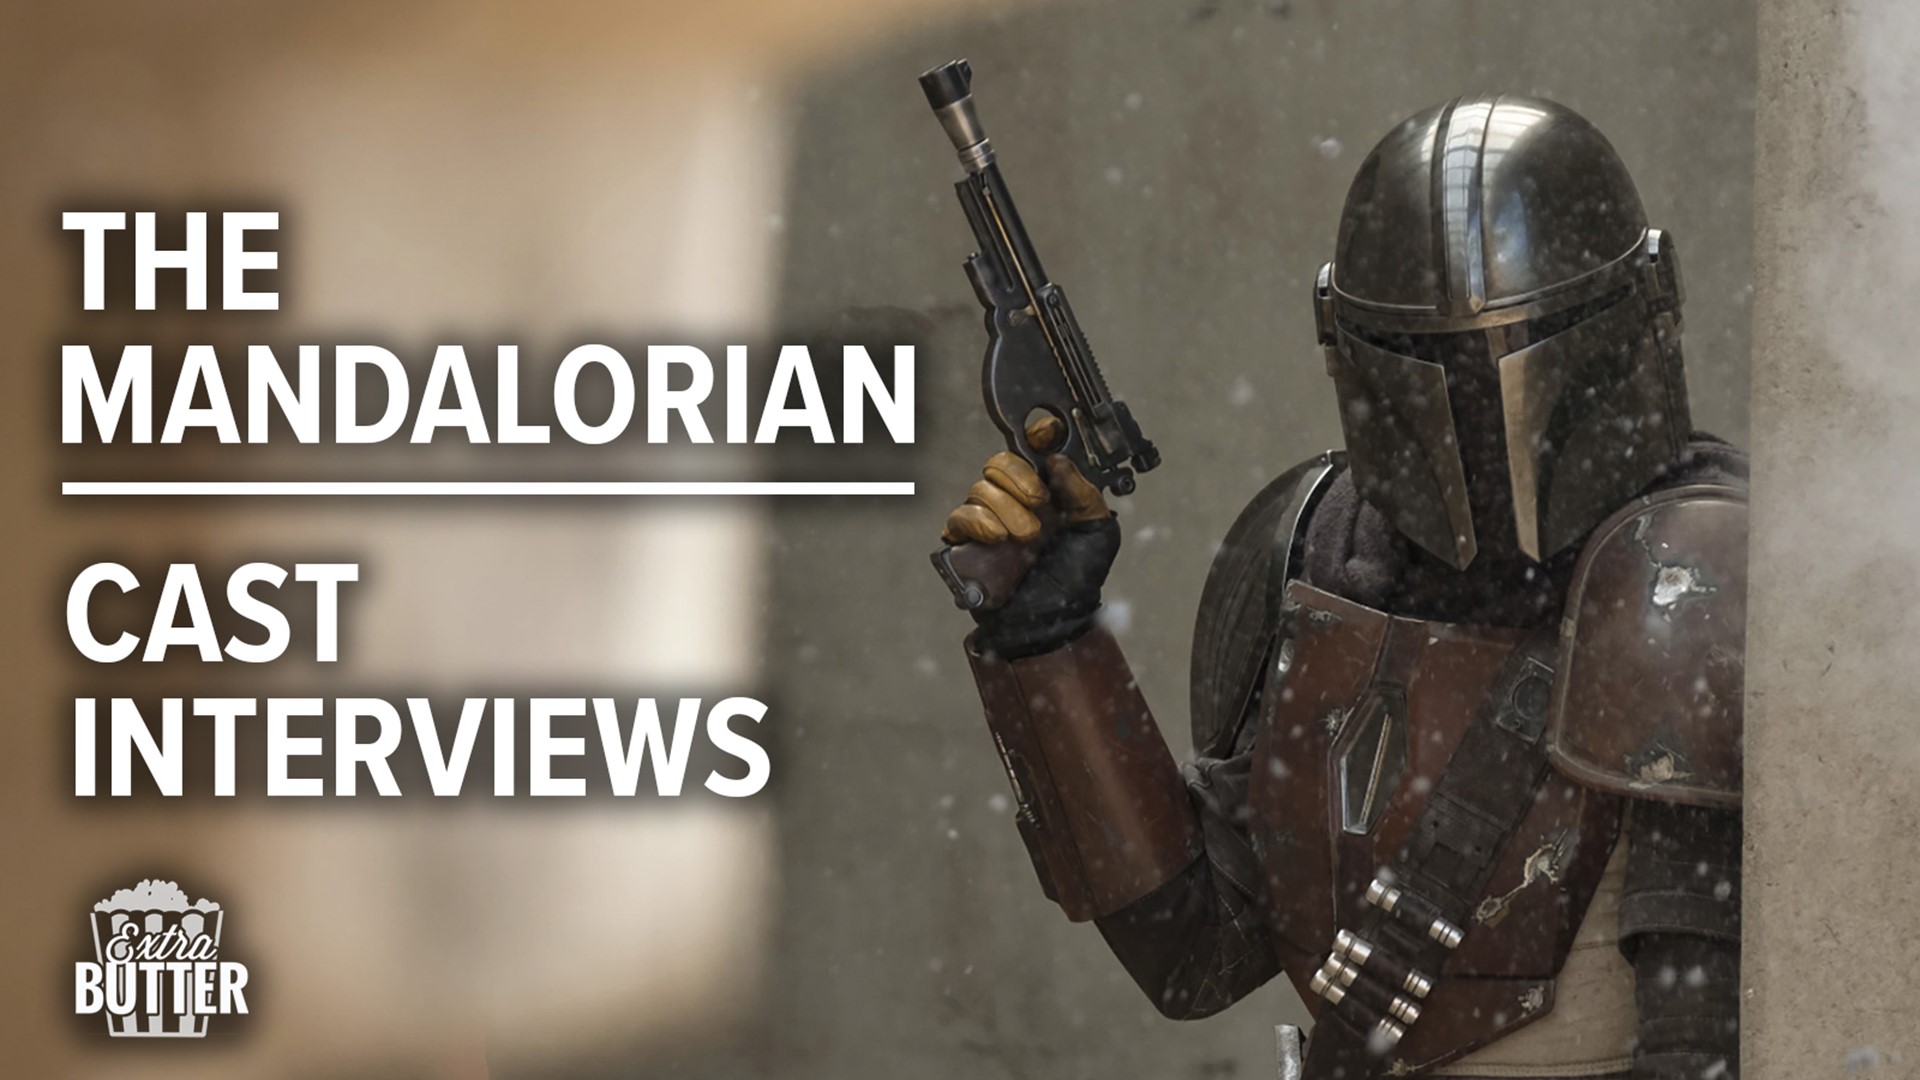 Hear from the cast of the new Disney Plus Star Wars series 'The Mandalorian.' Interviews include Gina Carano, Taika Waititi, Giancarlo Esposito, and Carl Weathers.